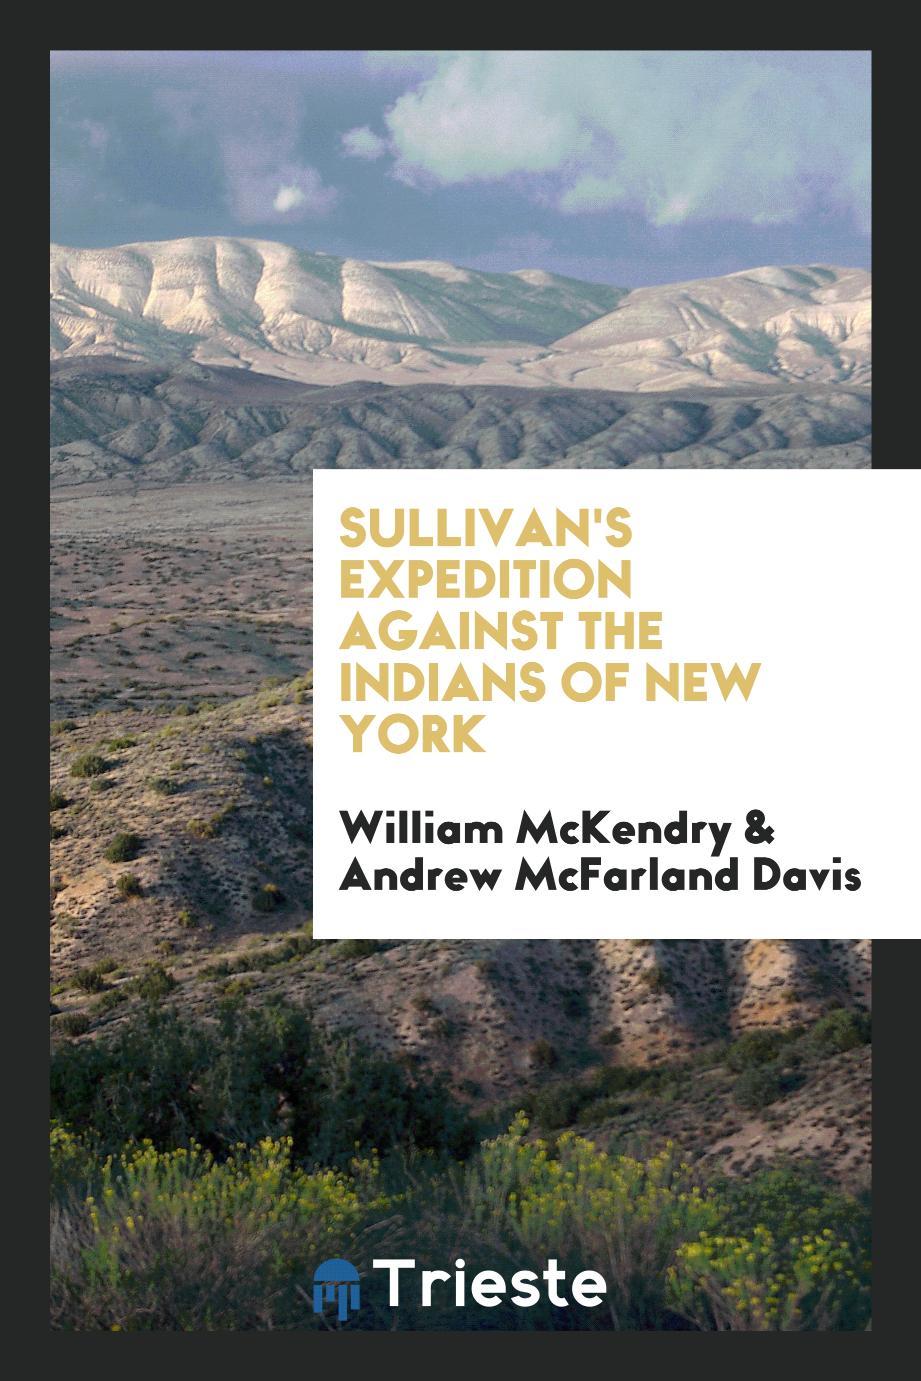 Sullivan's expedition against the Indians of New York